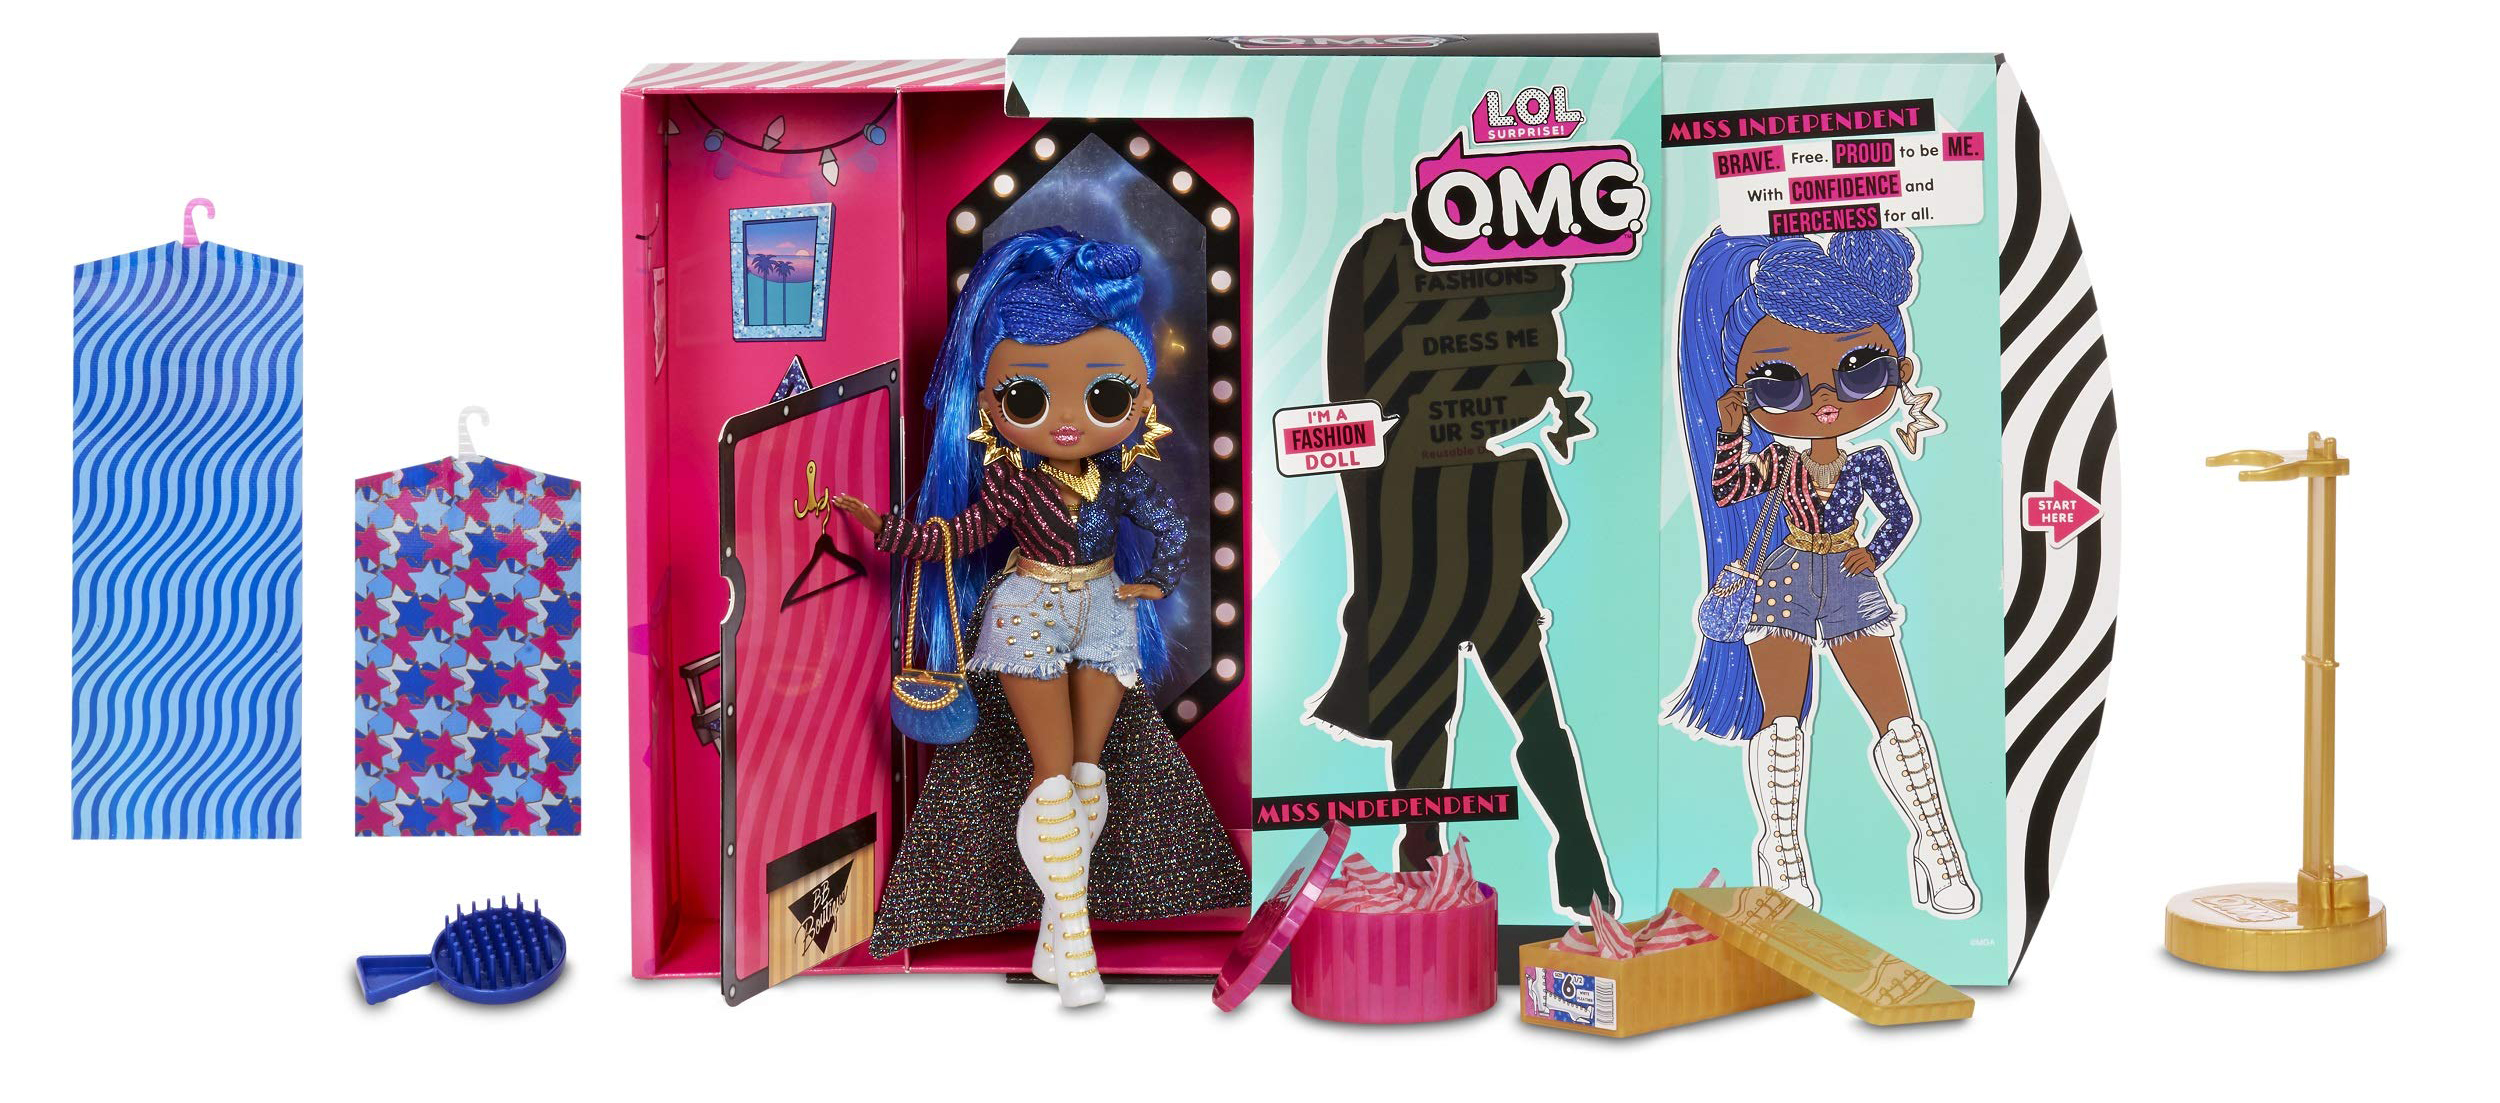 LOL Surprise OMG CANDYLICIOUS Doll O.M.G Series 2 New 2020 IN STOCK L.O.L 